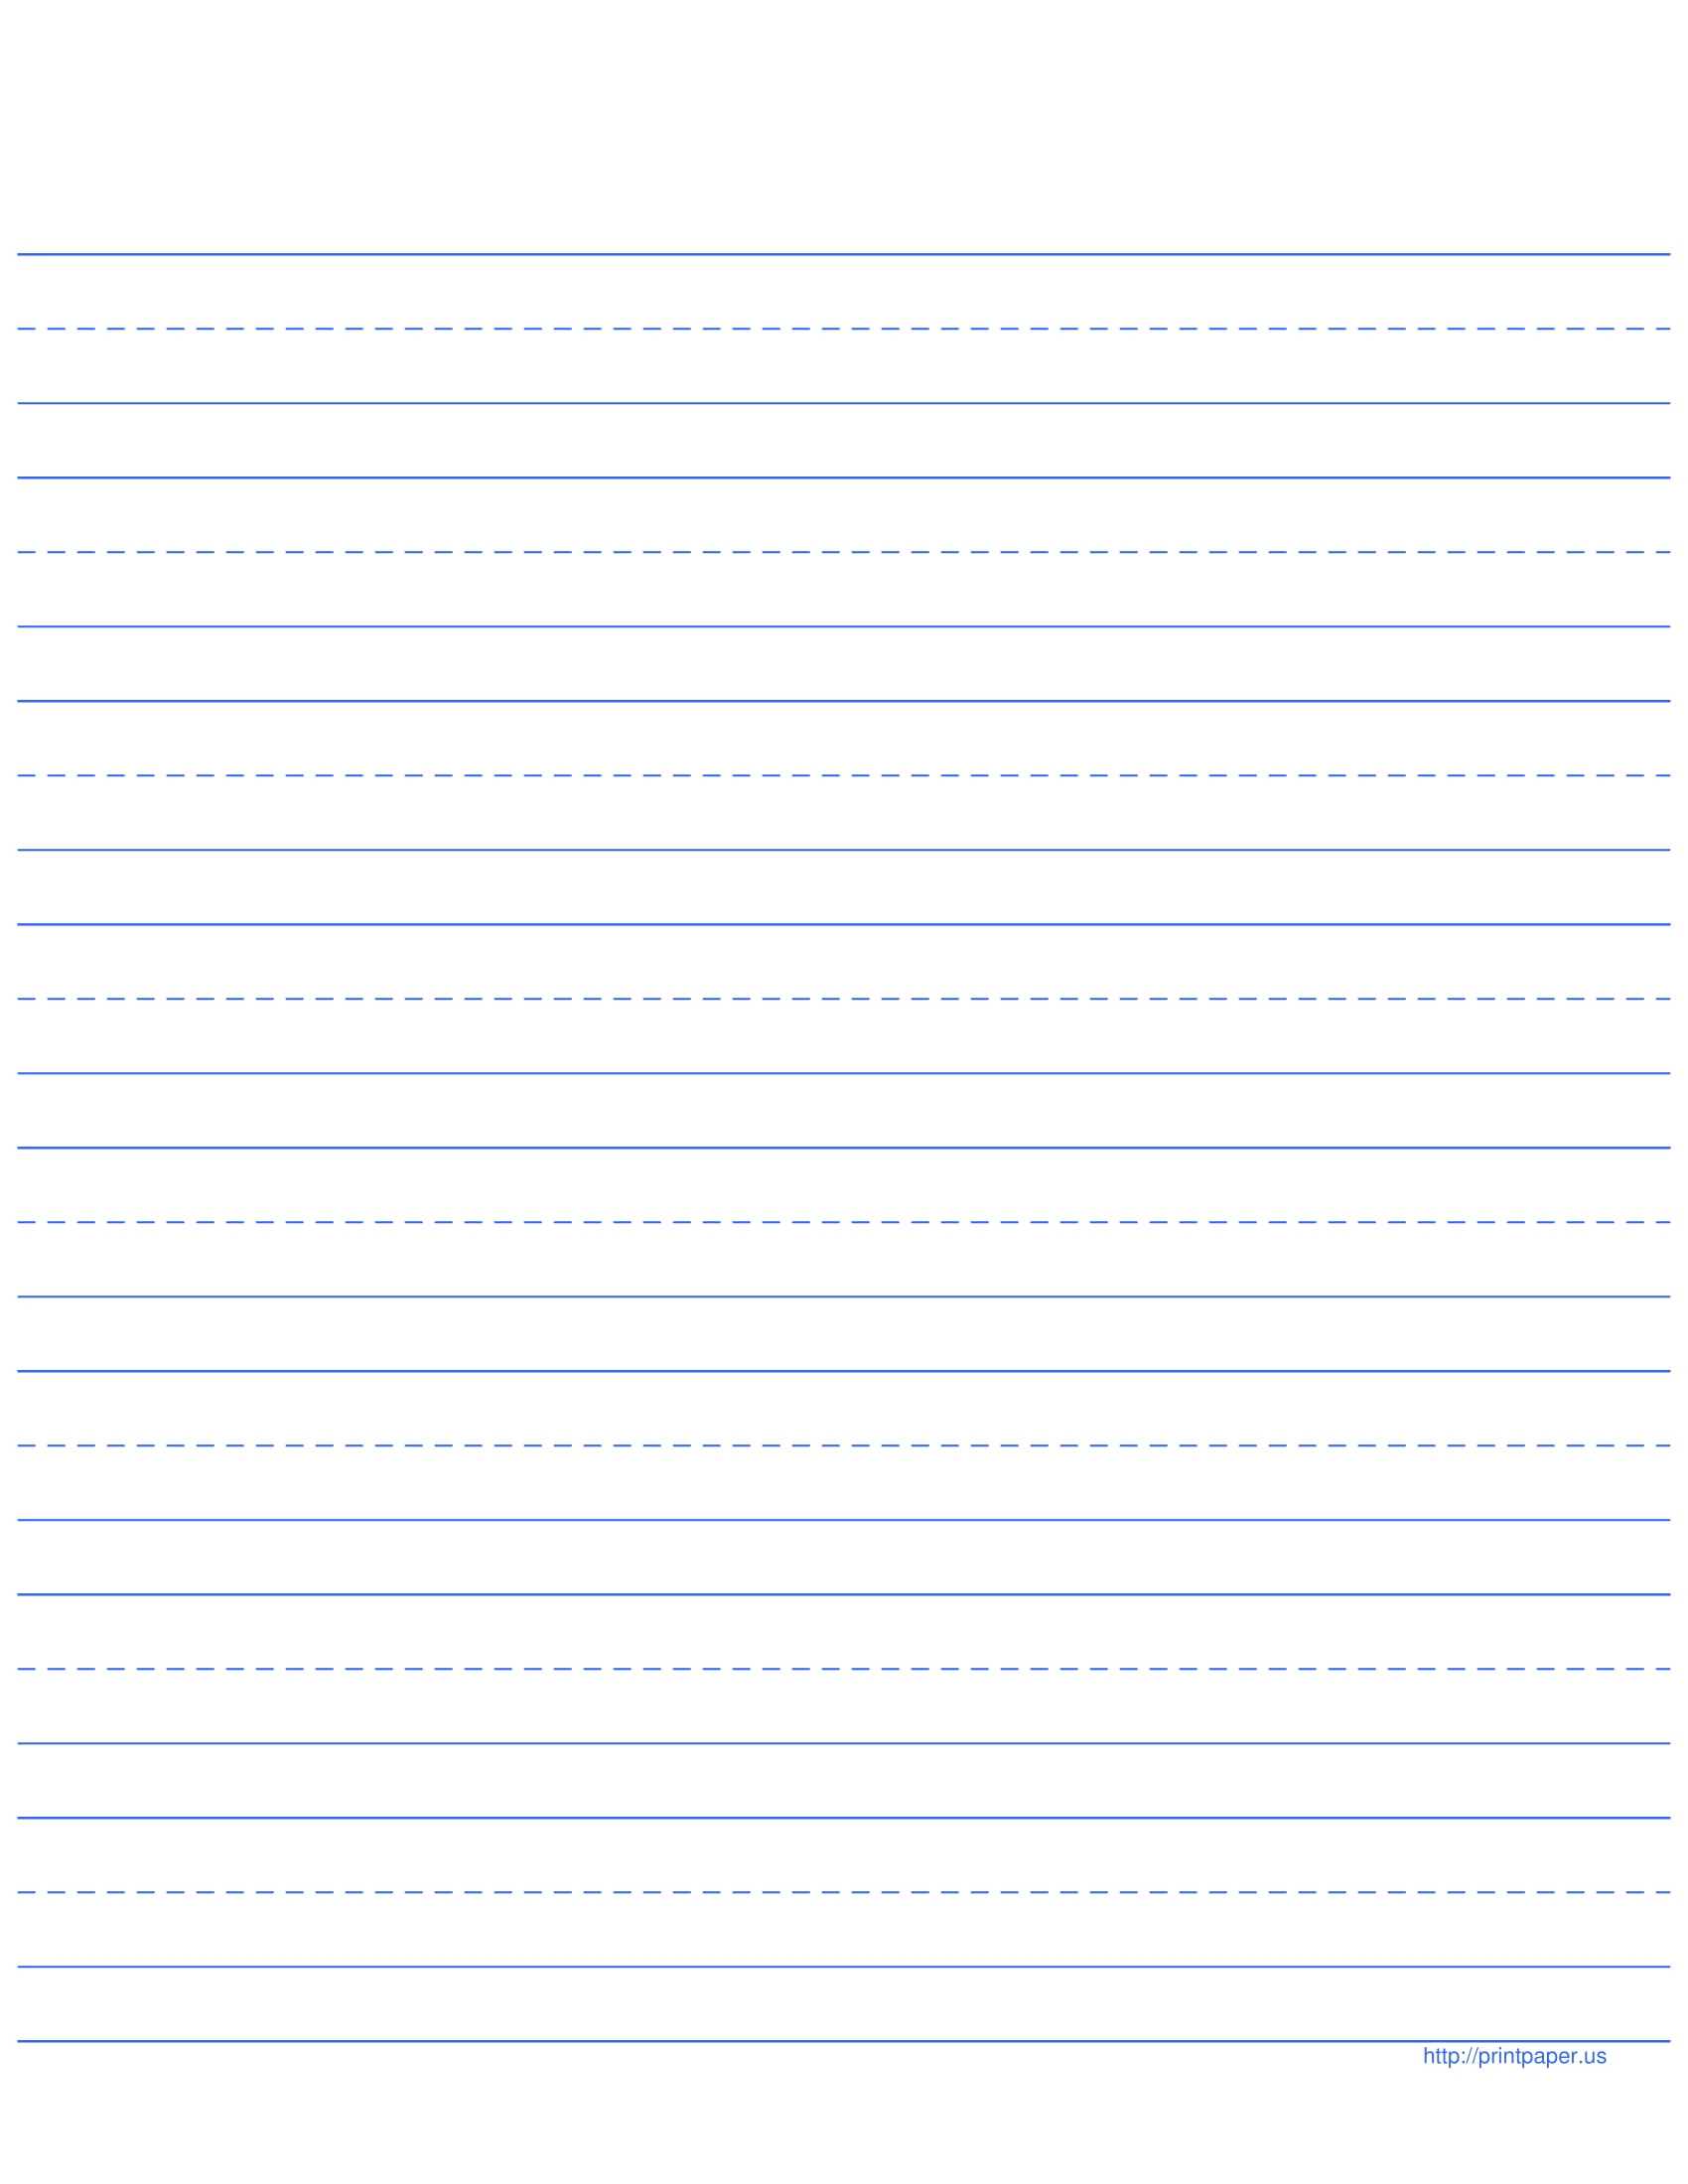 11+ Lined Paper Templates – Pdf | Free & Premium Templates Inside Ruled Paper Template Word